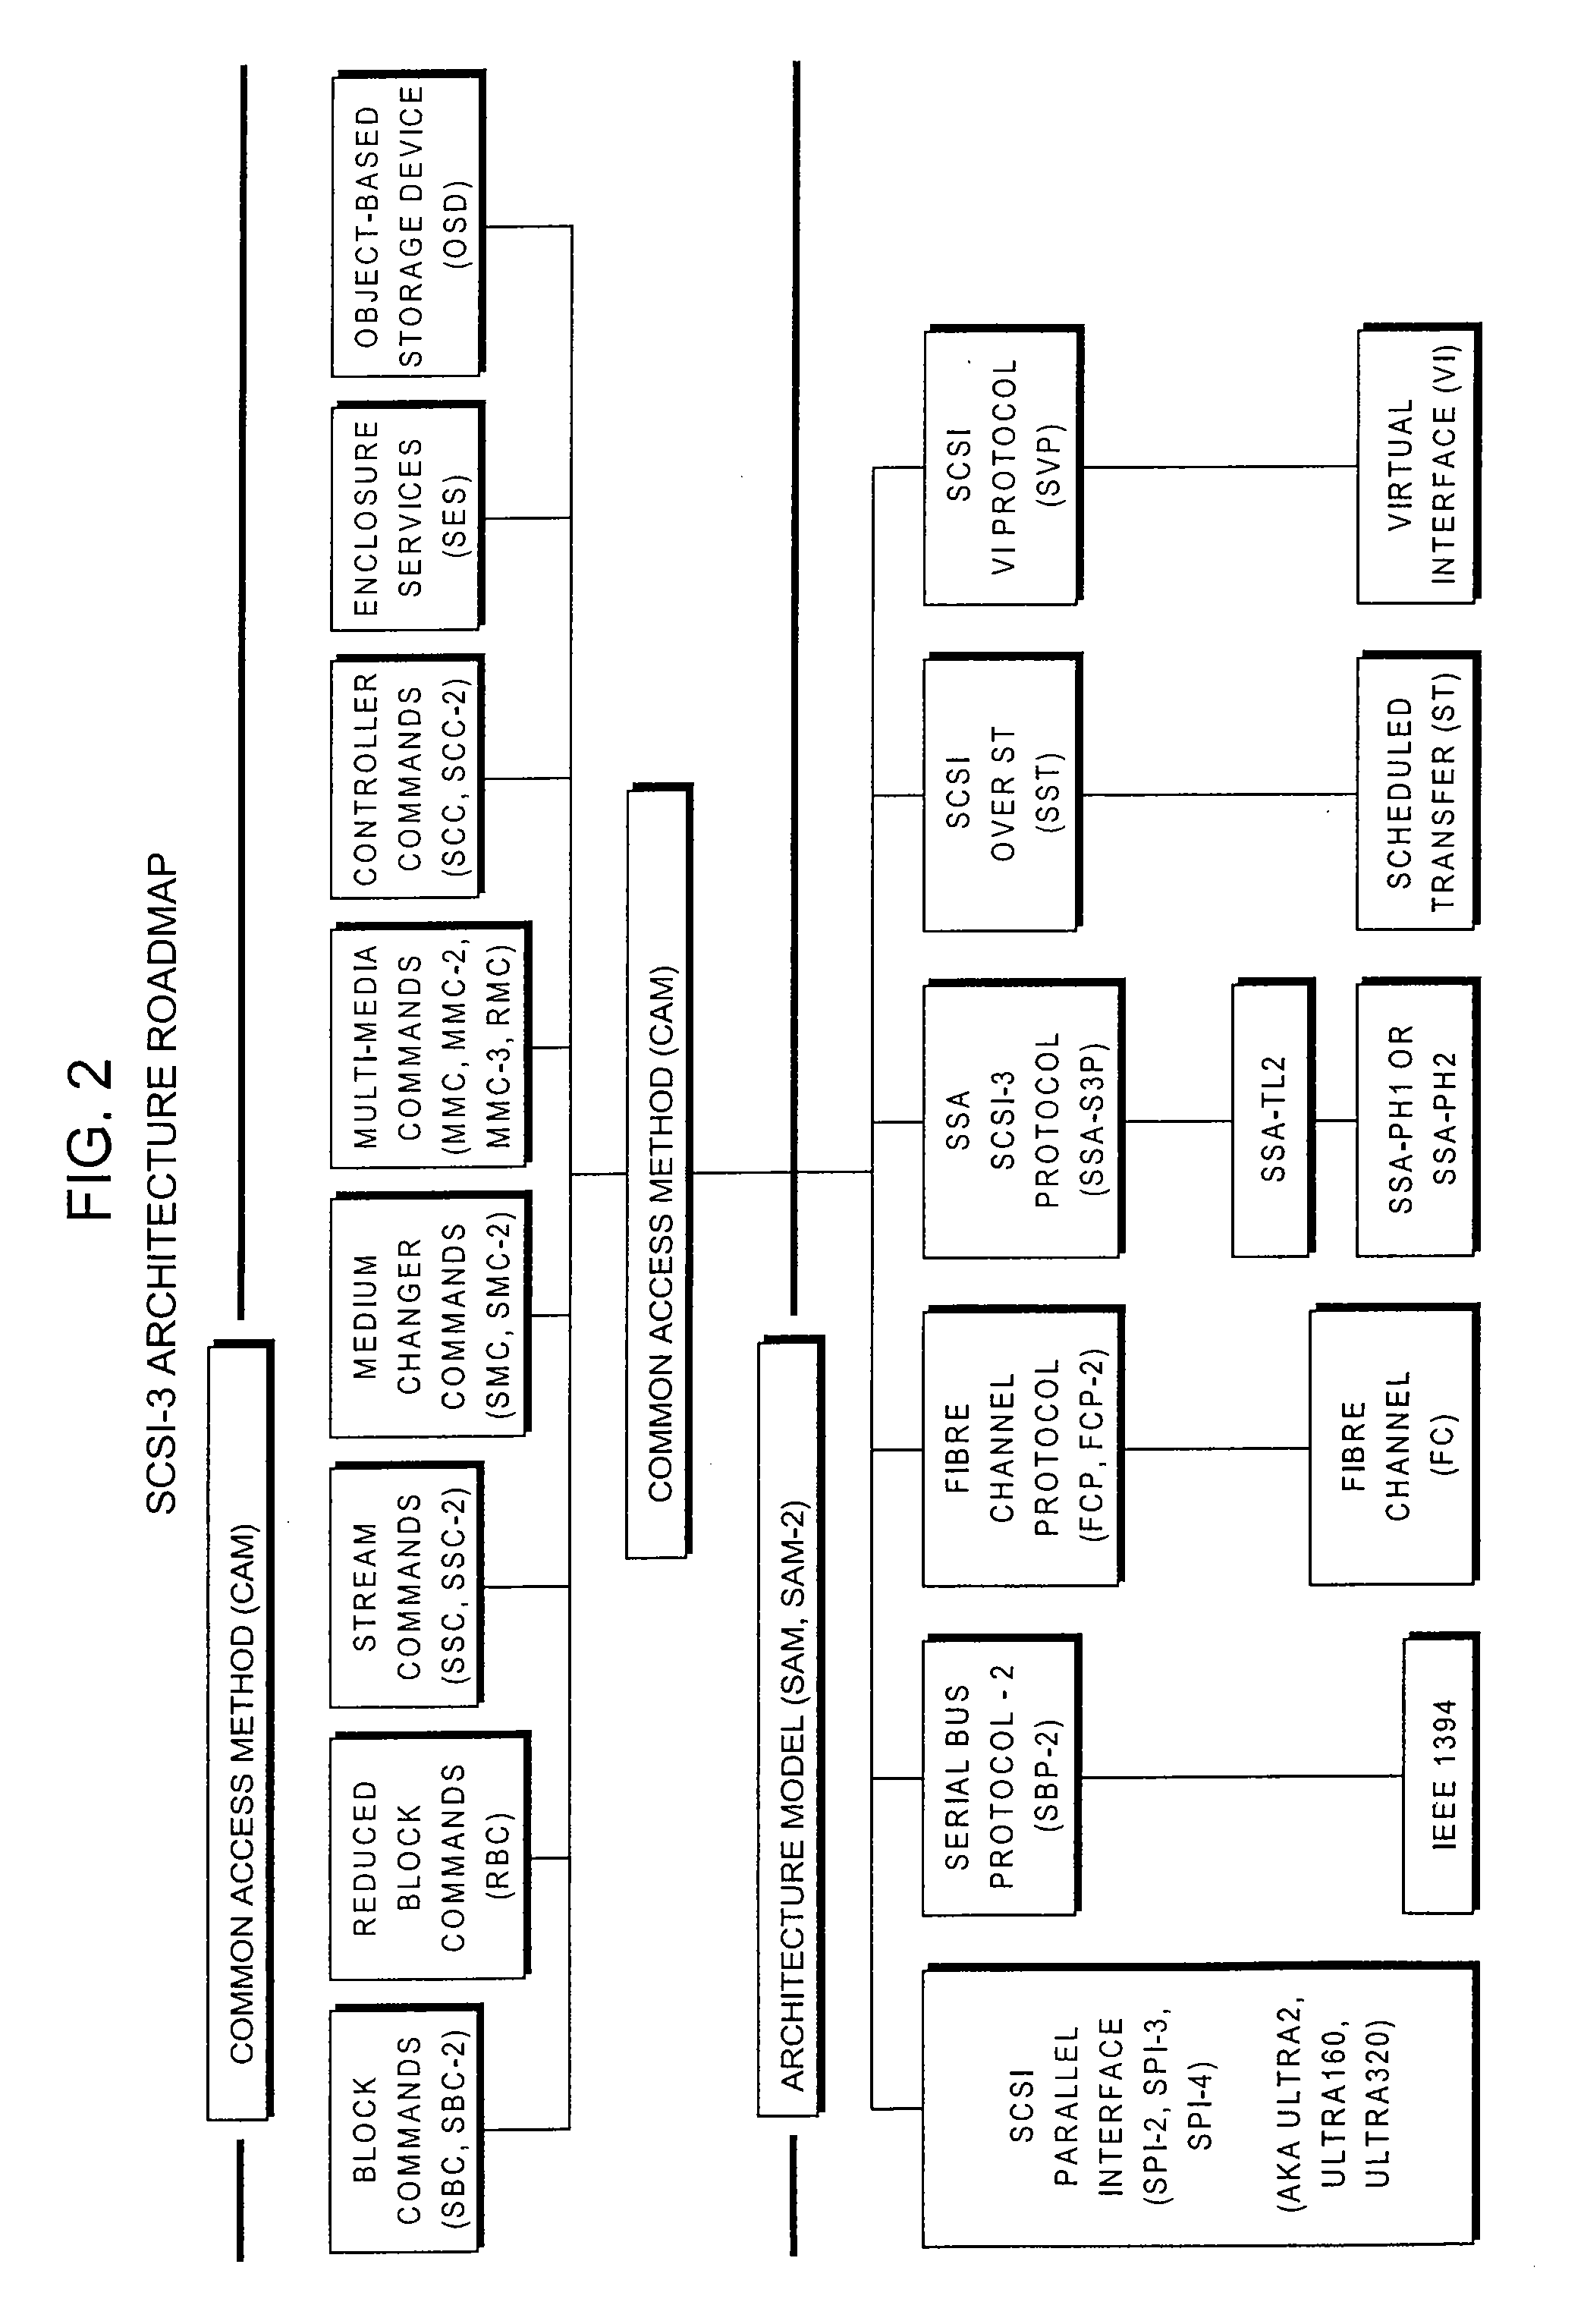 Method and system for providing multimedia information on demand over wide area networks